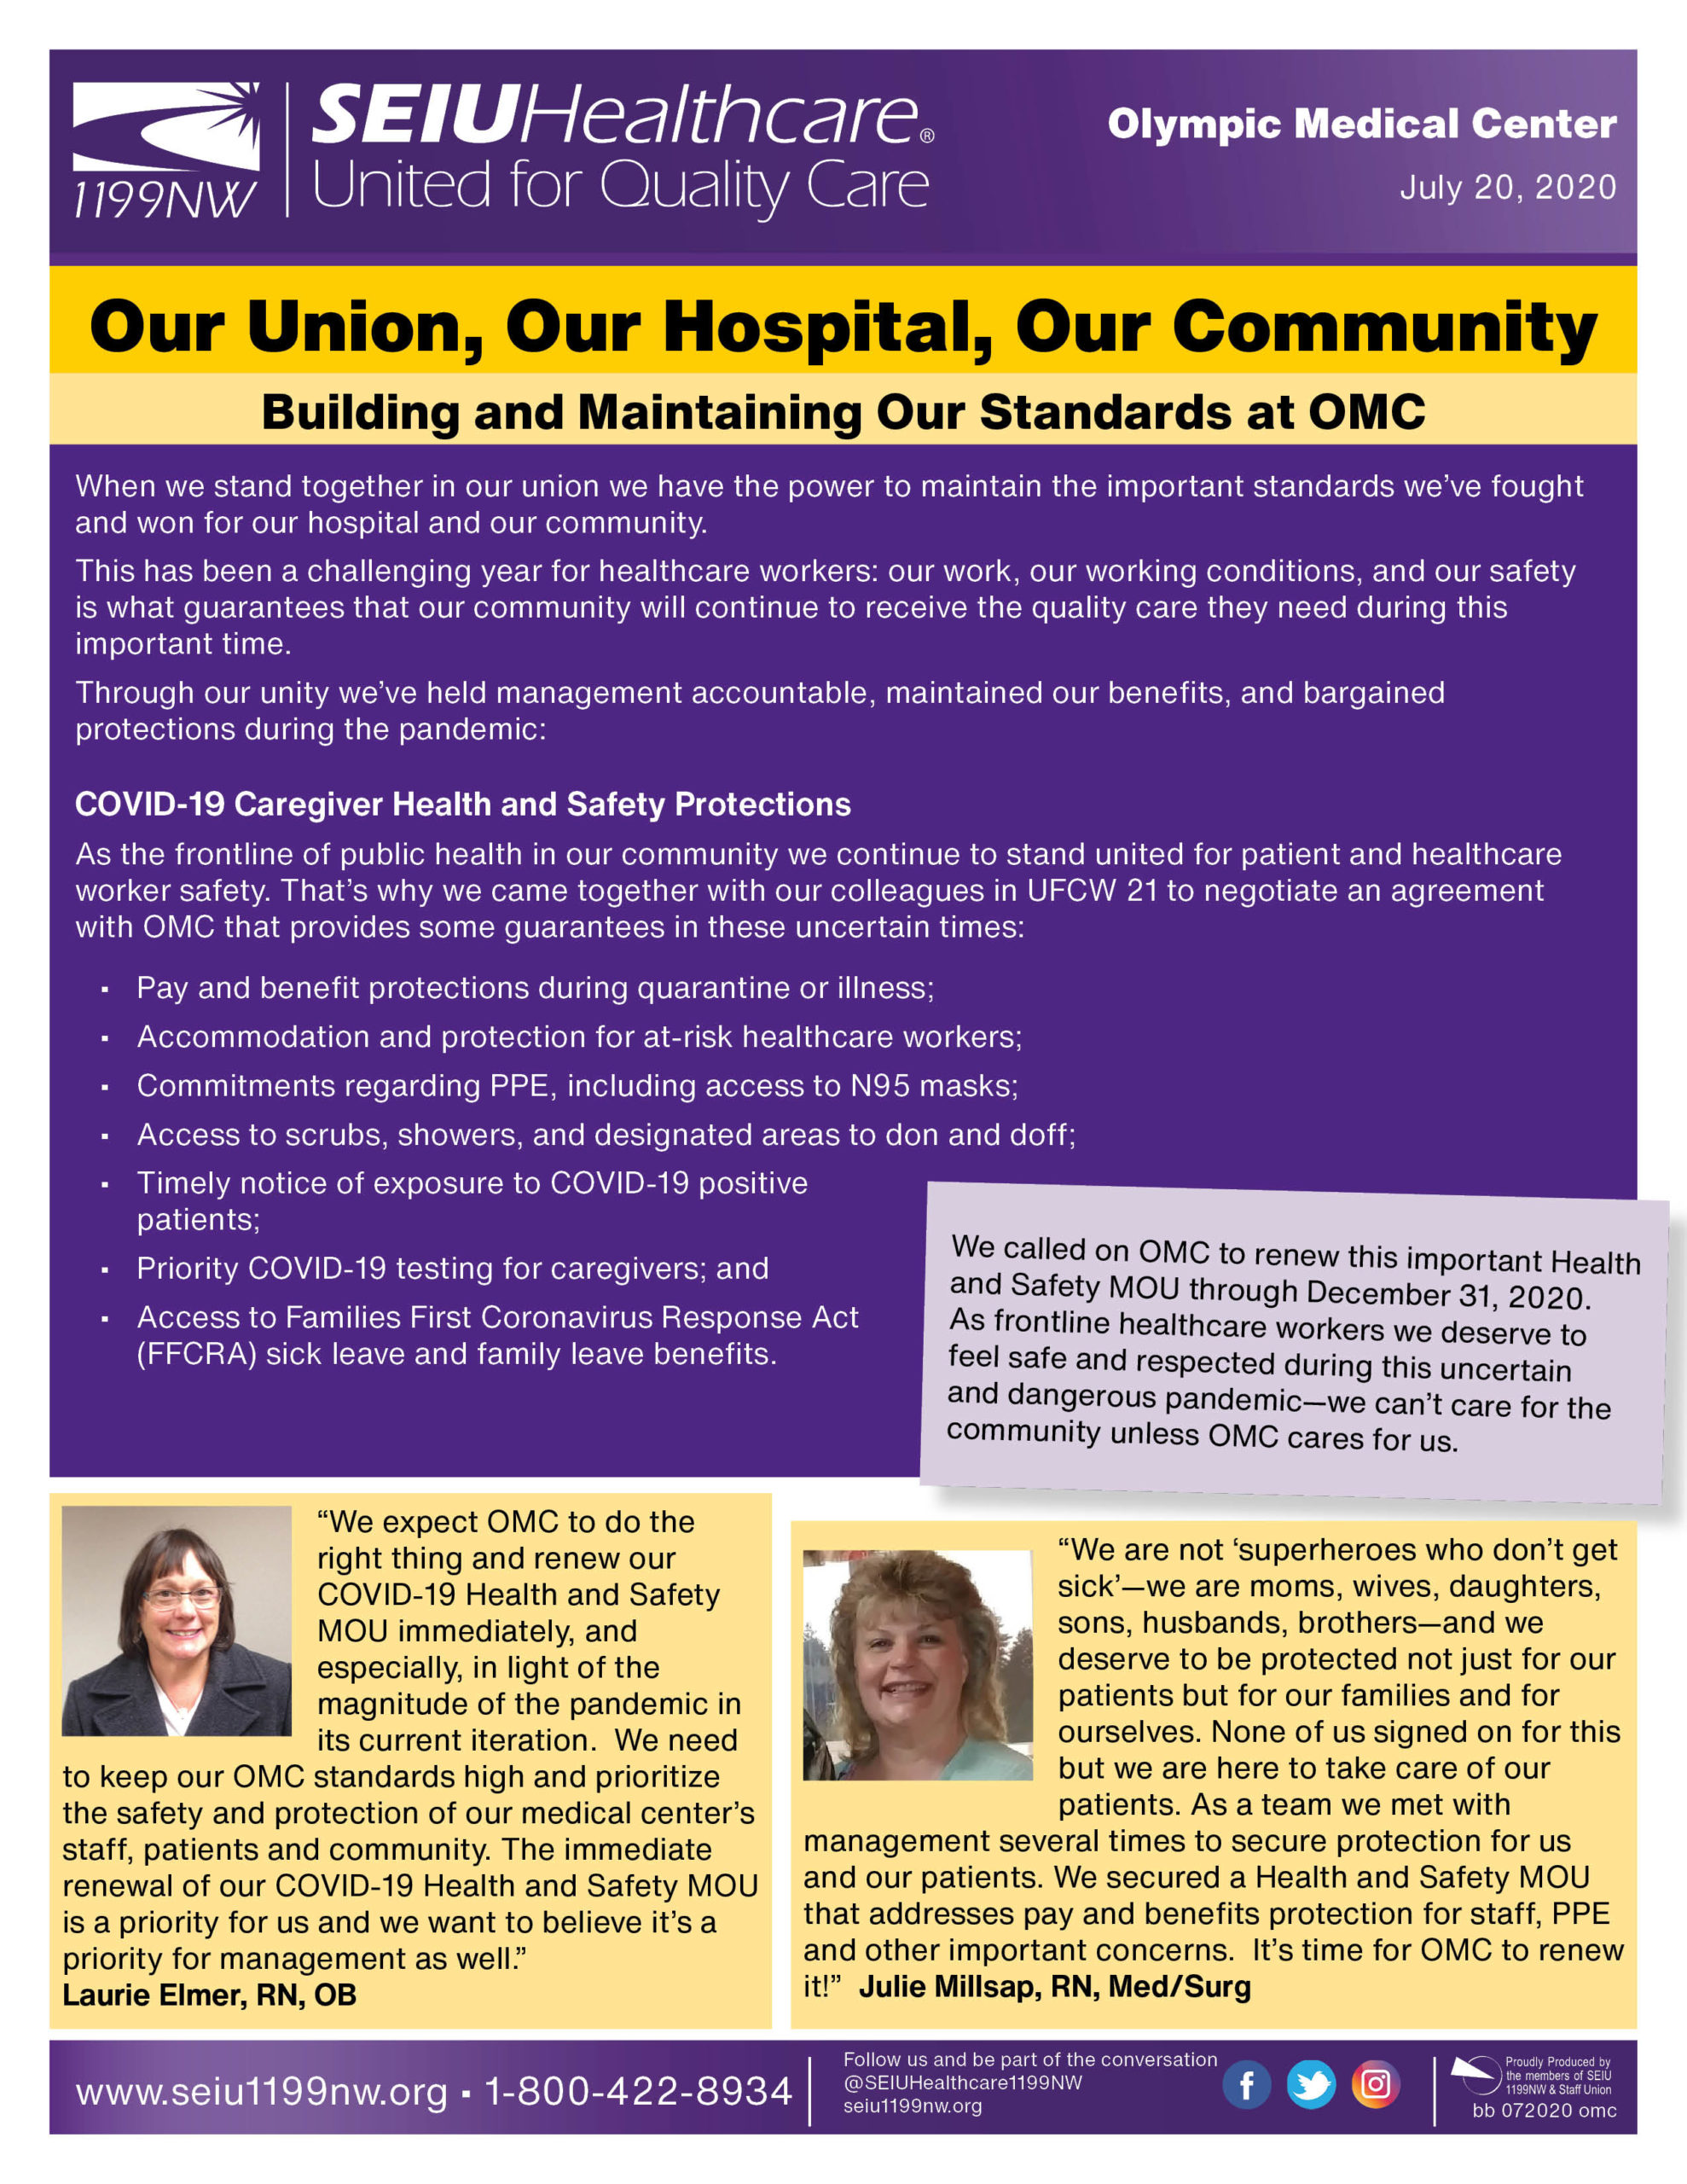 Our Union, Our Hospital, Our Community